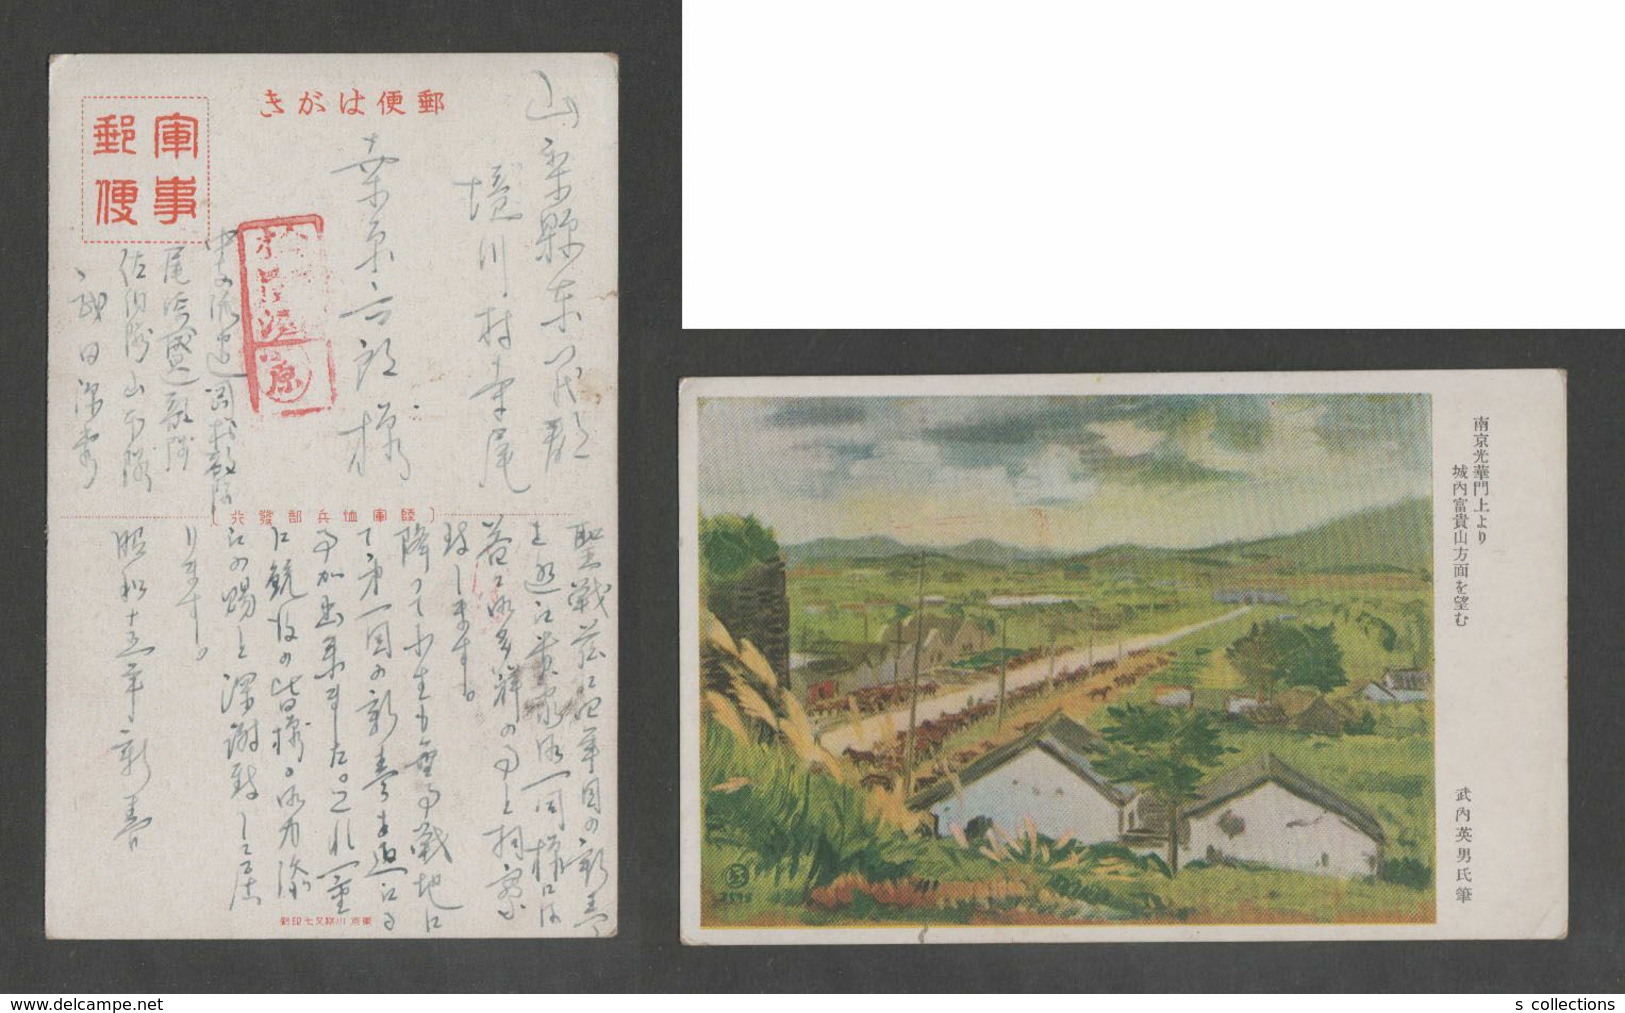 JAPAN WWII Military Nanjing Guanghua Picture Postcard CENTRAL CHINA WW2 MANCHURIA CHINE MANDCHOUKOUO JAPON GIAPPONE - 1943-45 Shanghai & Nankin